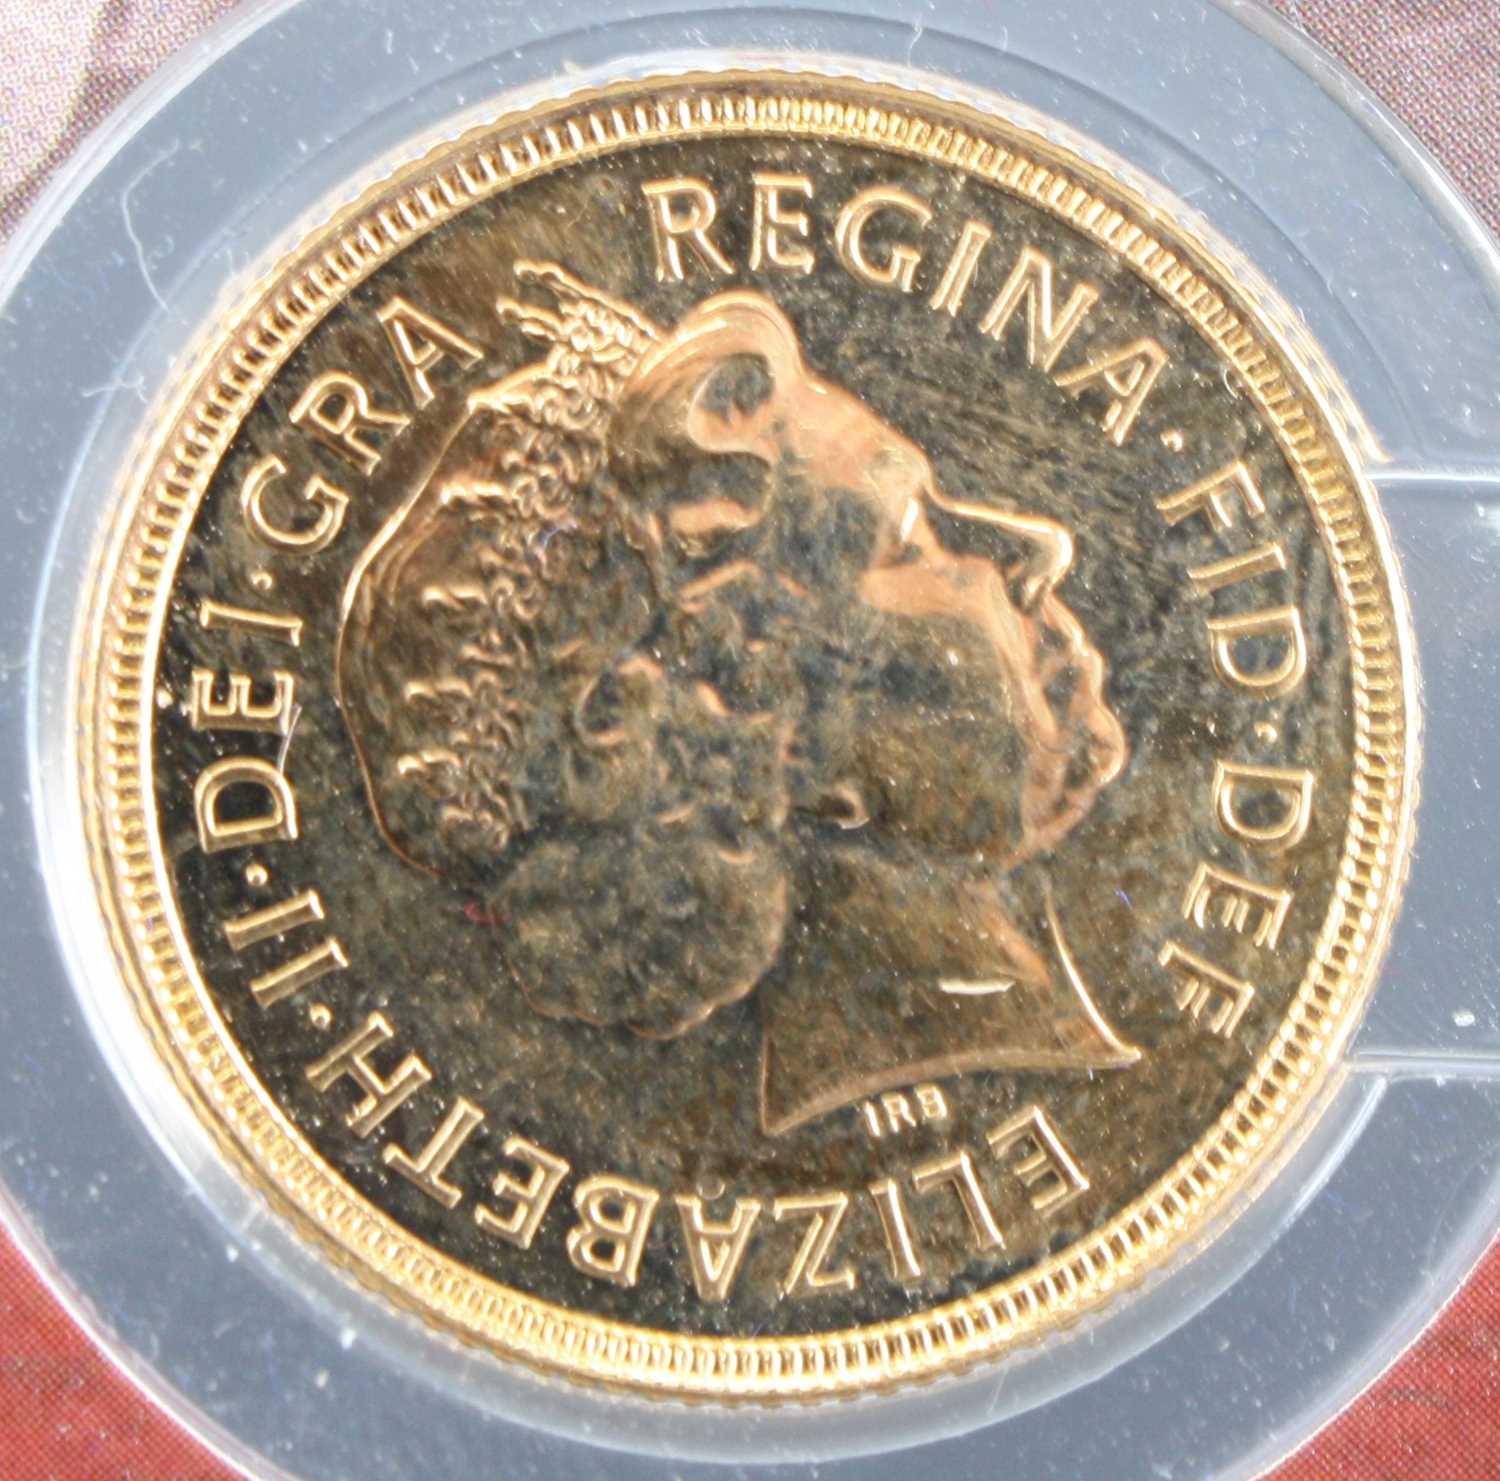 Great Britain, 2004 gold full sovereign, Elizabeth II, rev: St George and Dragon above date, card - Image 2 of 2